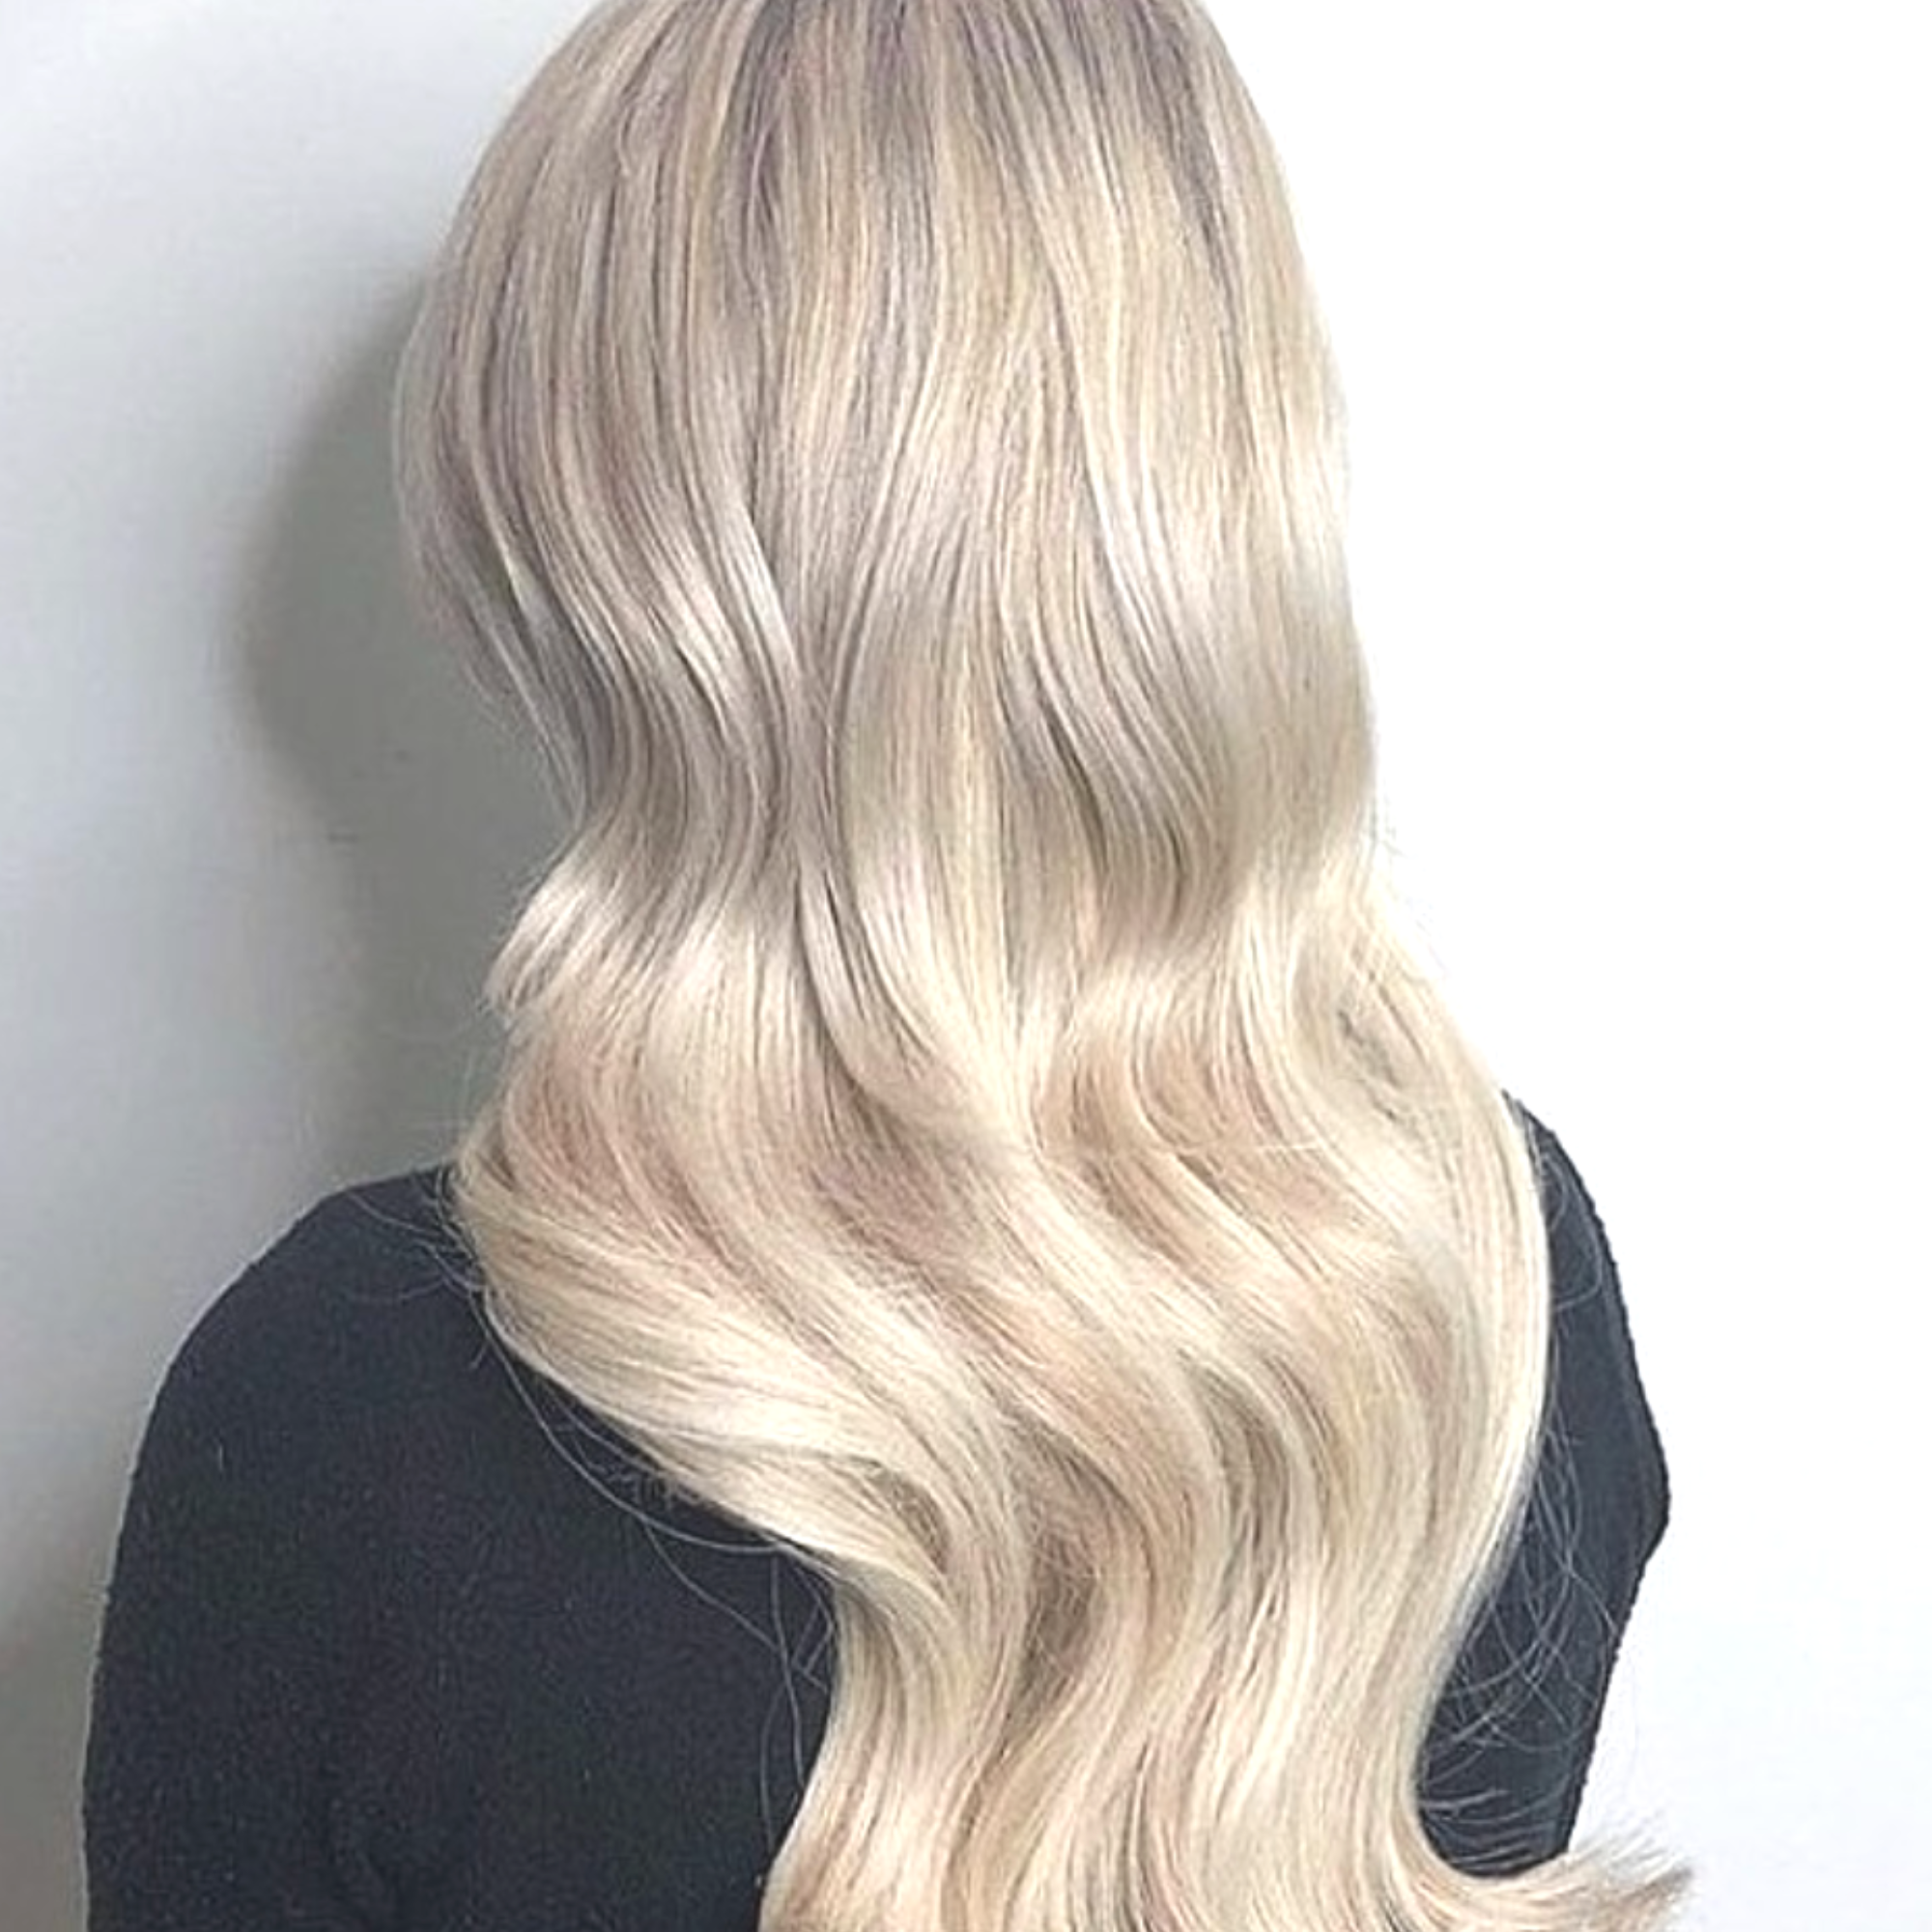 22" Invisible Tape Extensions Blonde AF